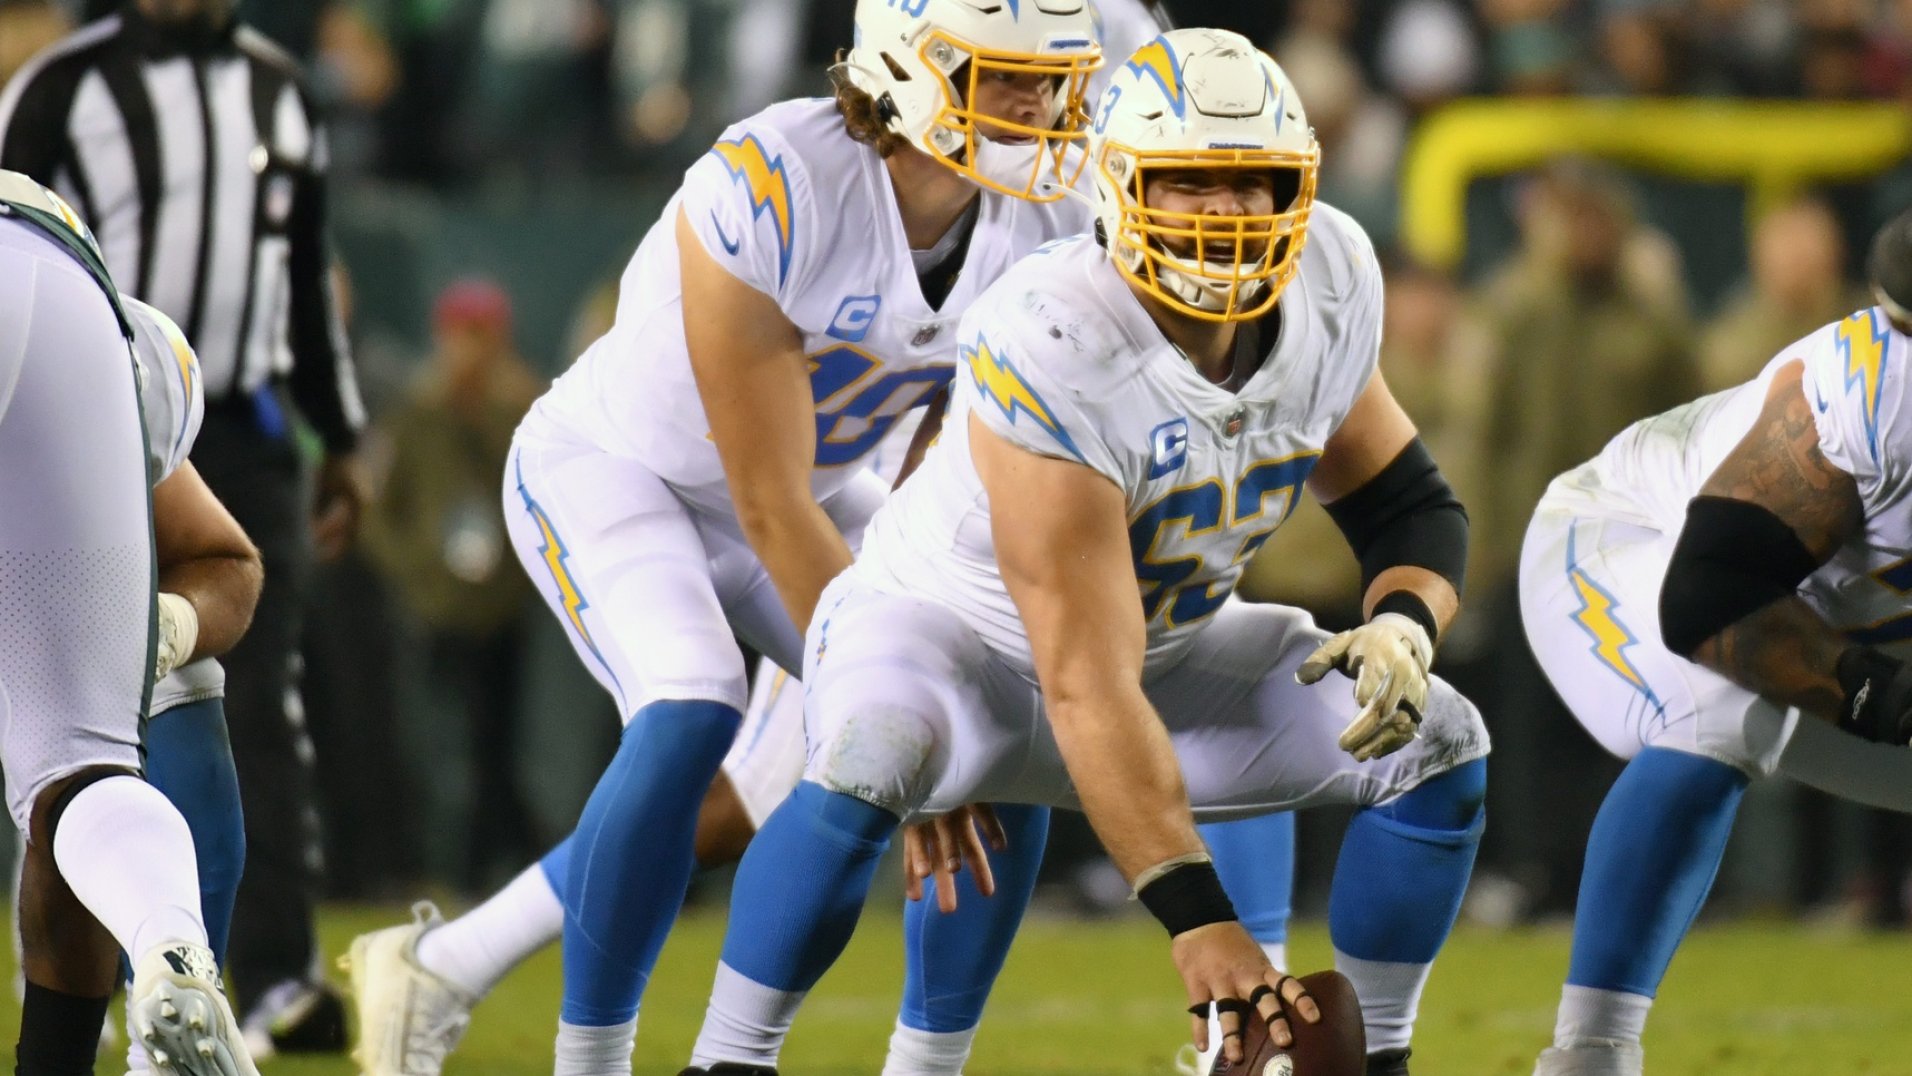 2022 NFL center rankings and tiers NFL News, Rankings and Statistics